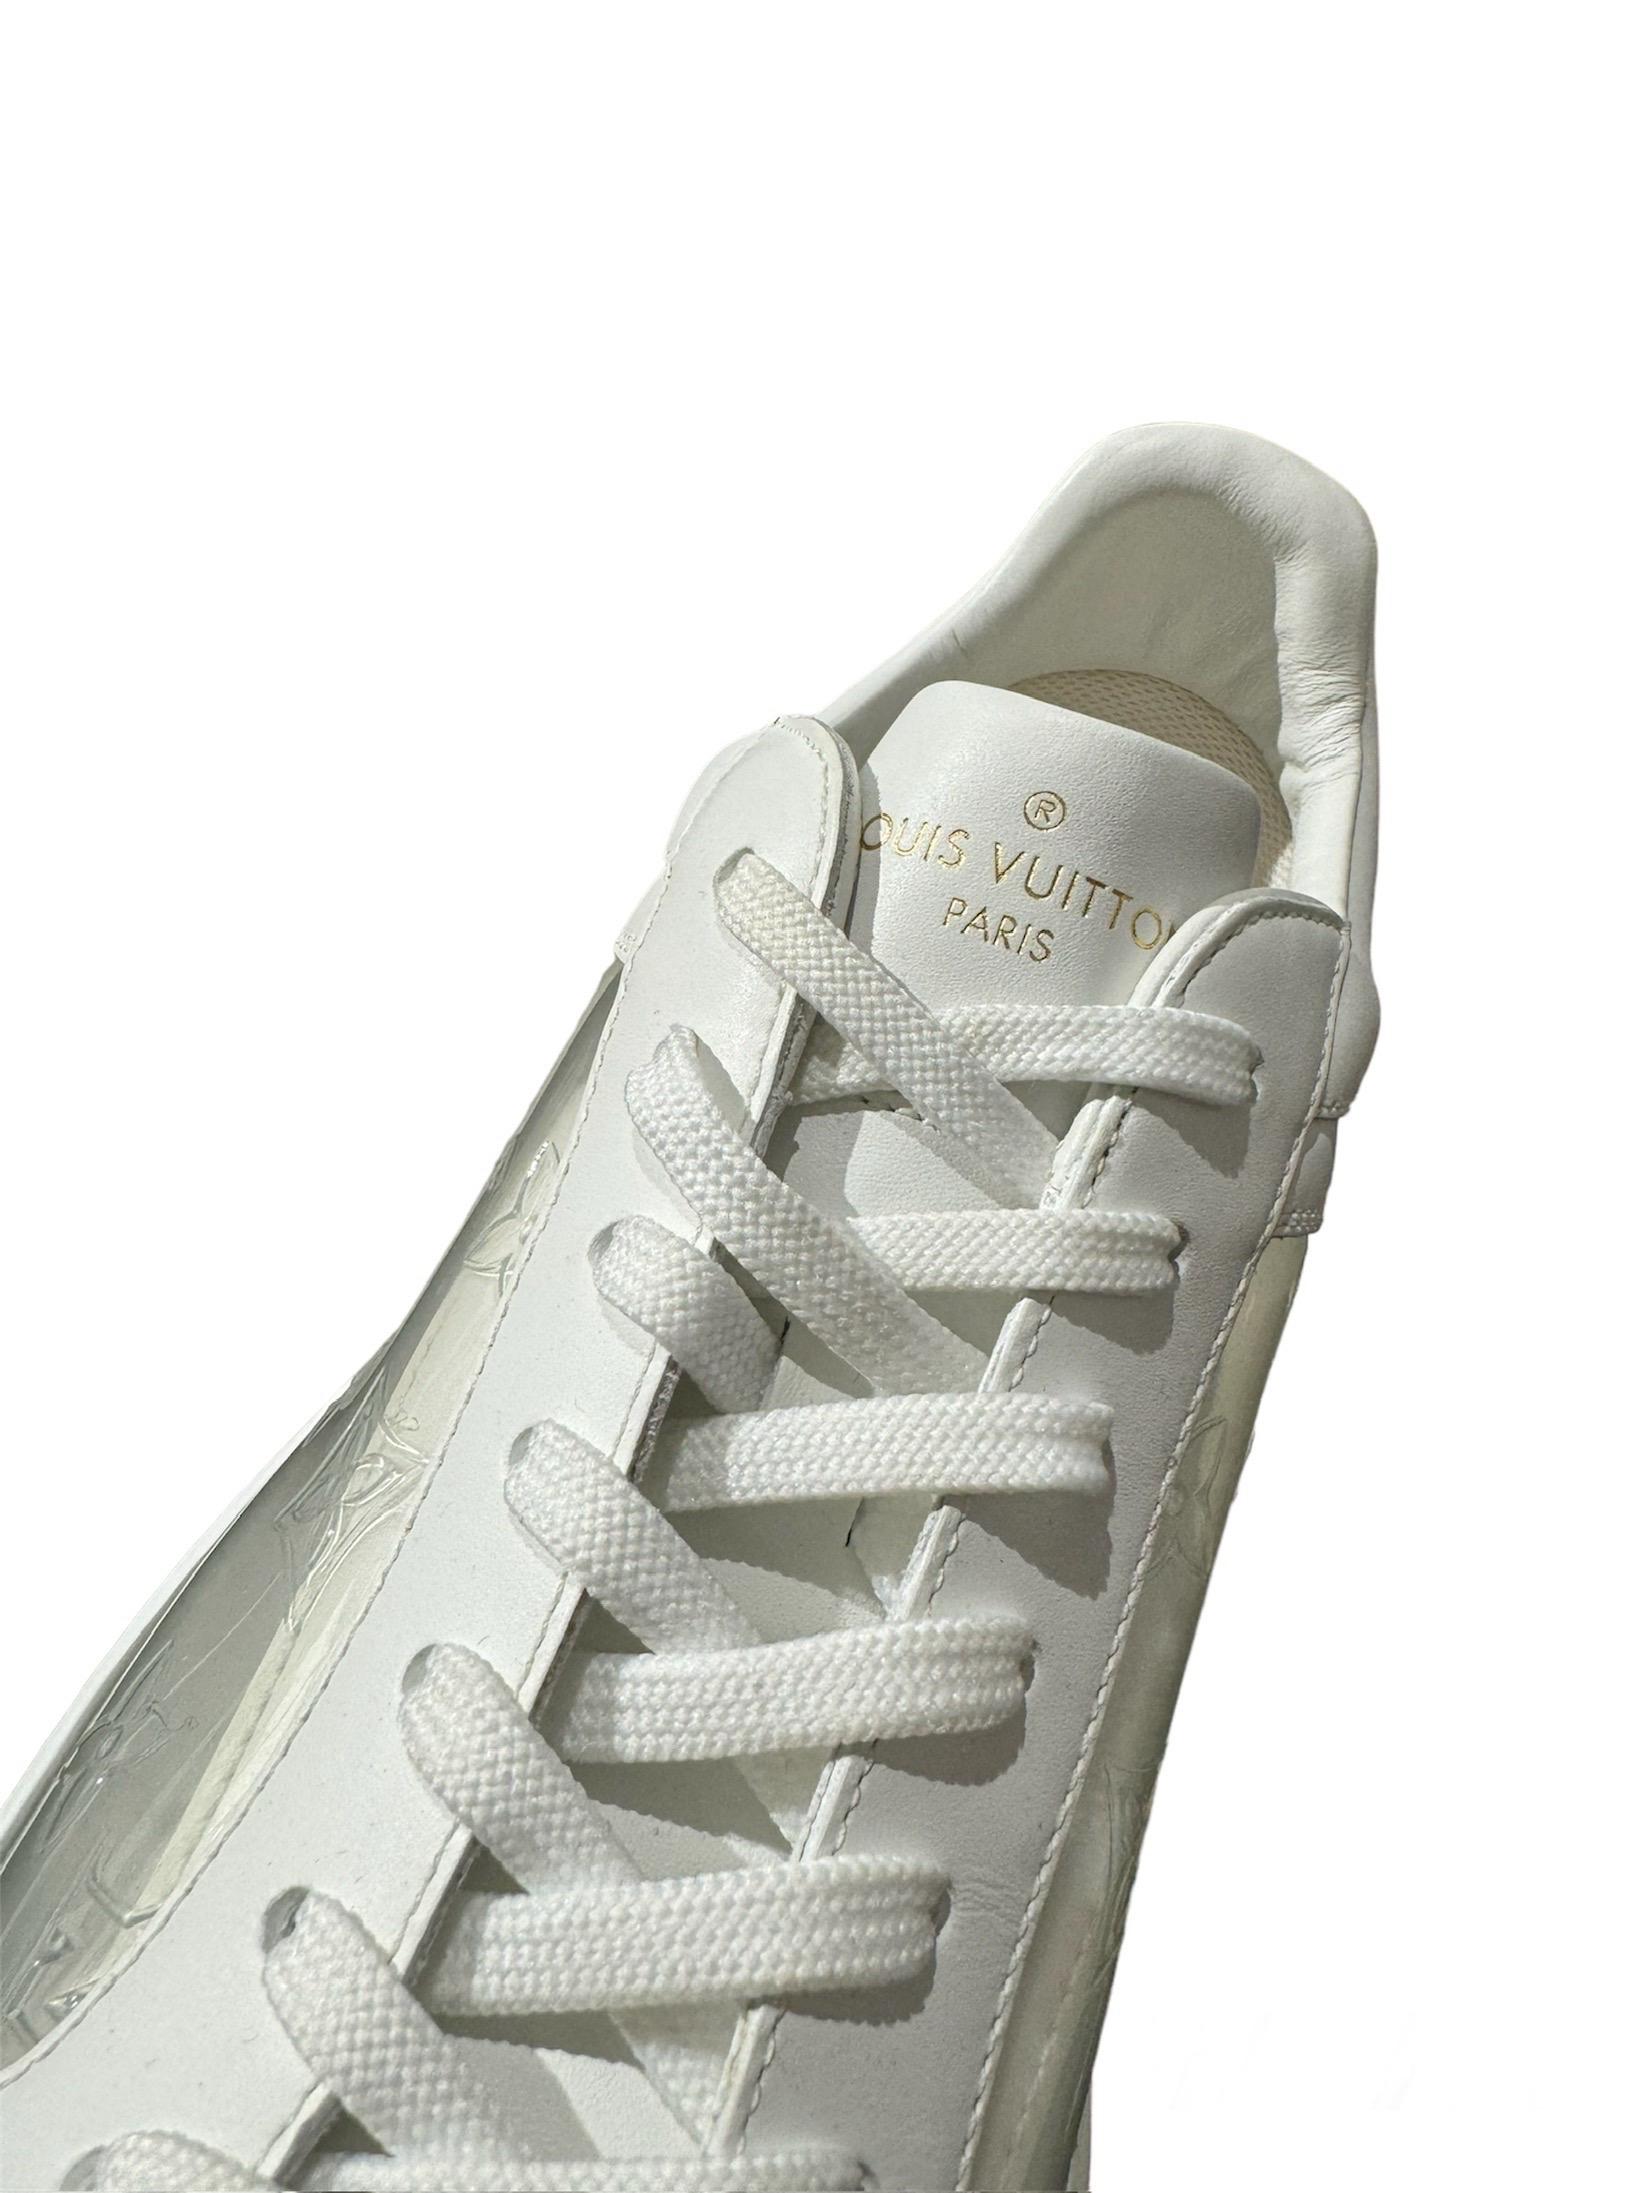 Louis Vuitton Sneakers Luxembourg For Sale 2